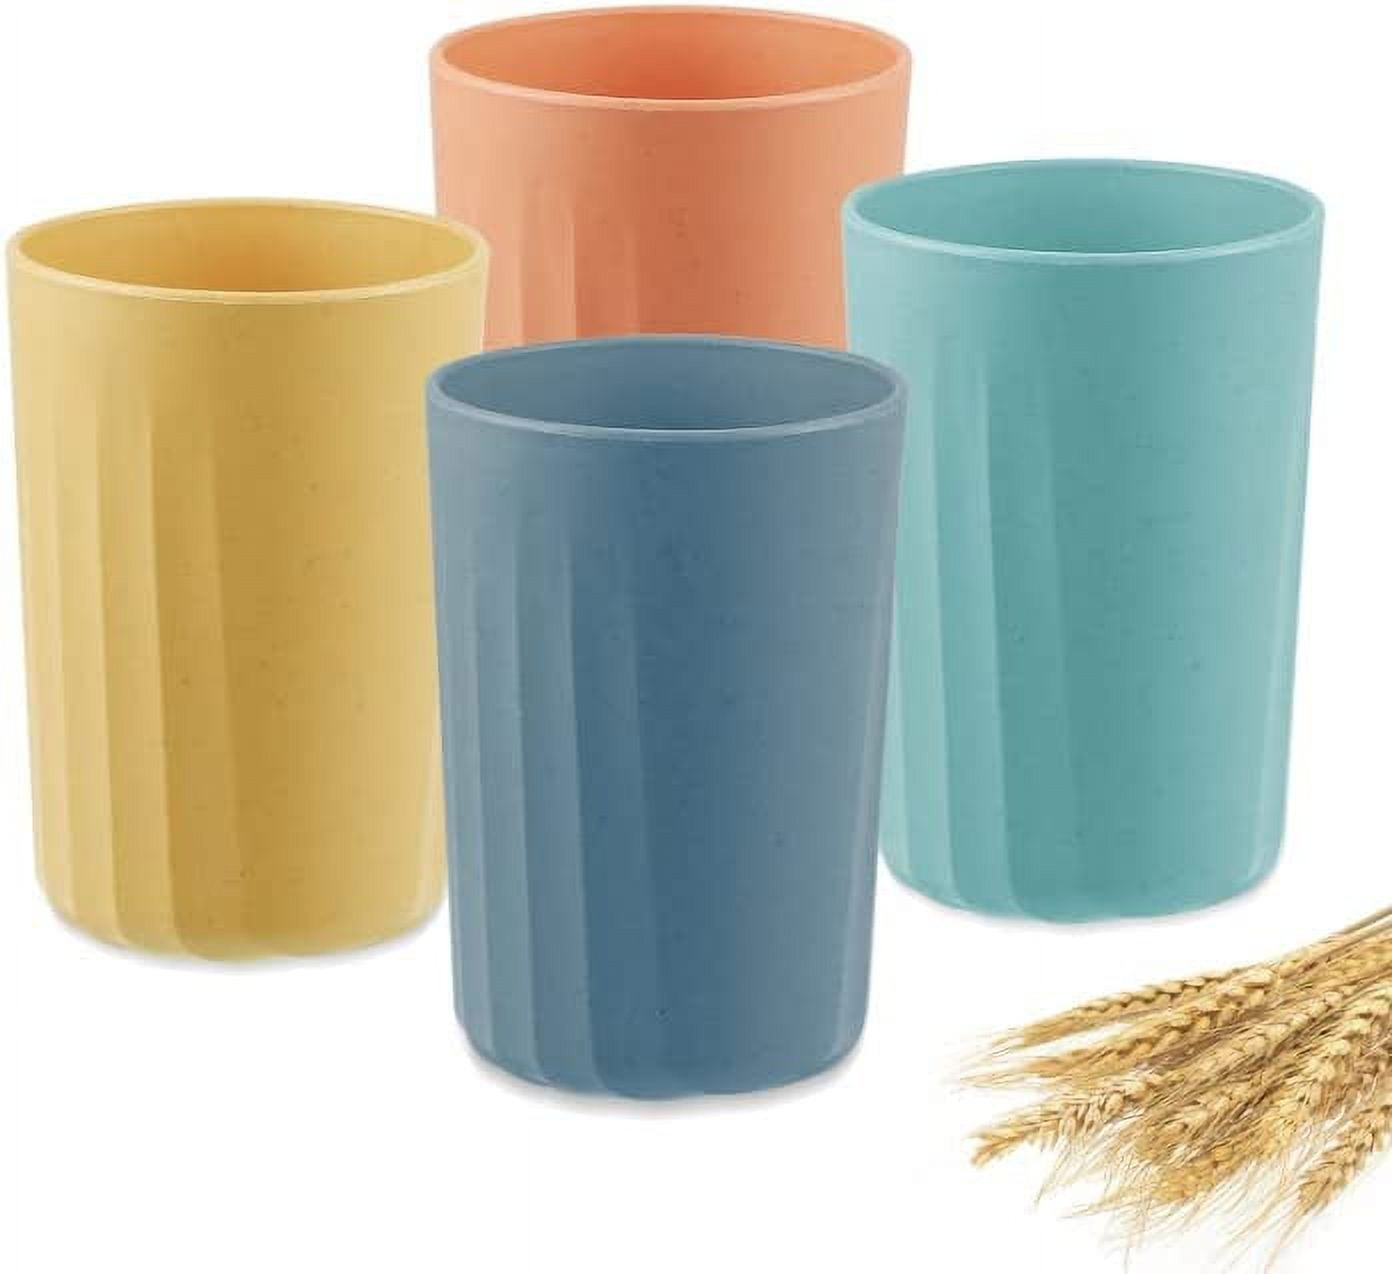 Eco-Friendly Unbreakable Reusable Drinking Cup (12 oz) Wheat Straw Stackable,Biodegradable Healthy Tumbler Set 15 Reusable Bathroom Drinking